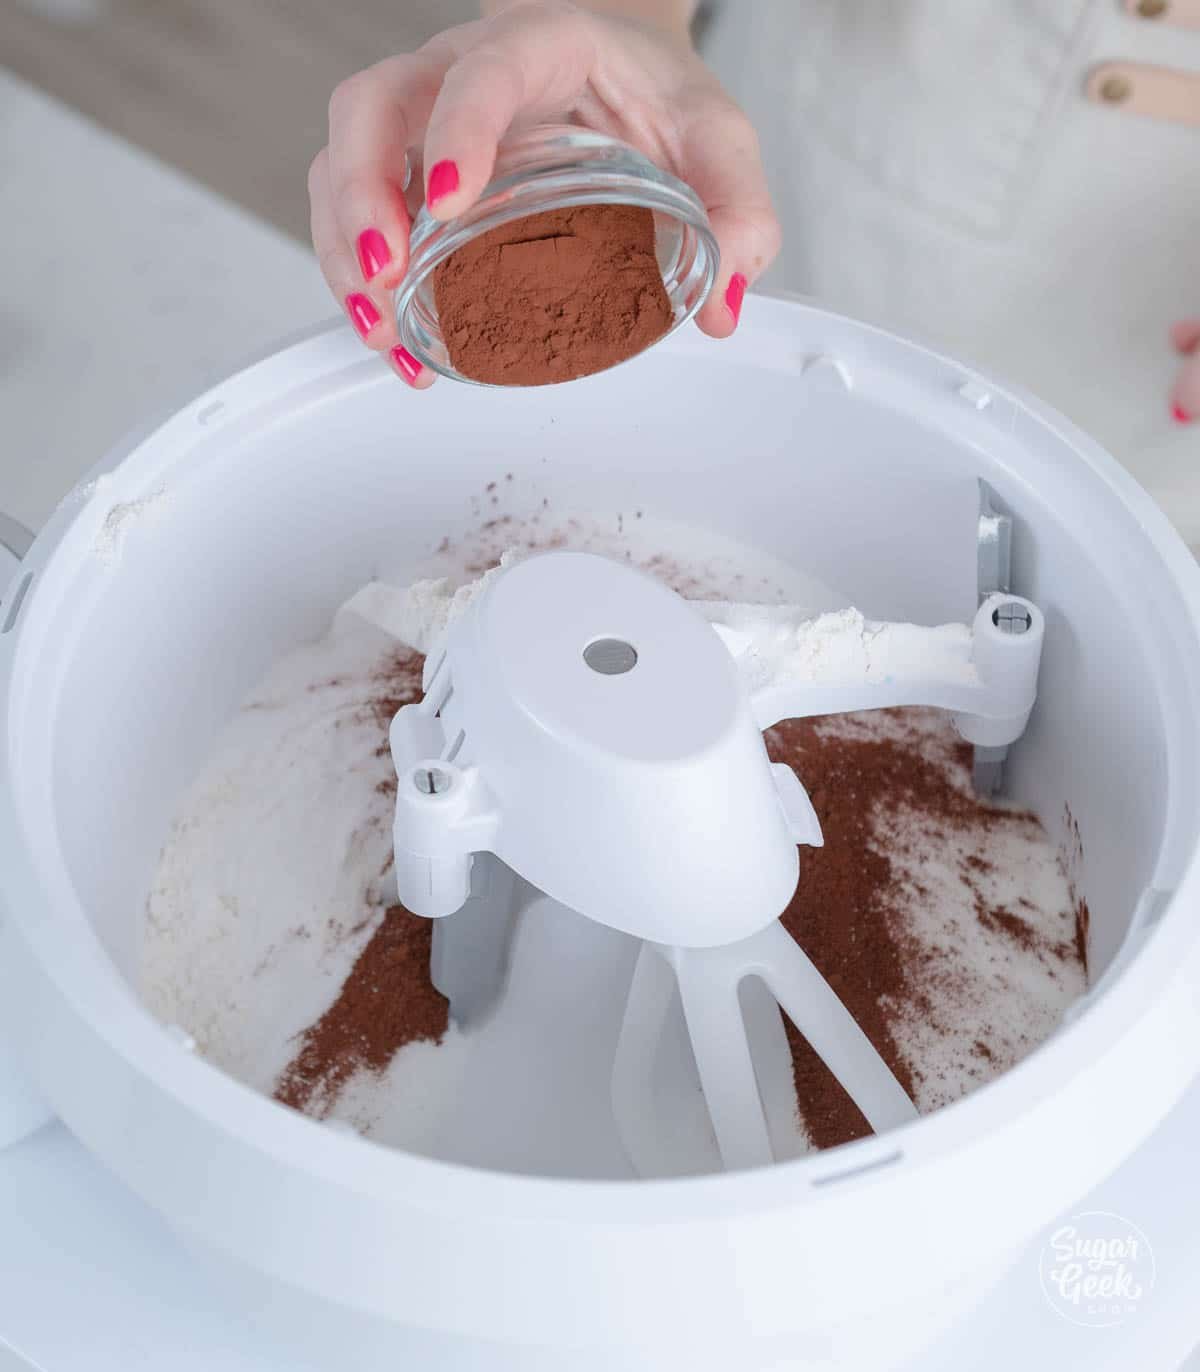 hand adding cocoa powder to mixing bowl with dry ingredients.